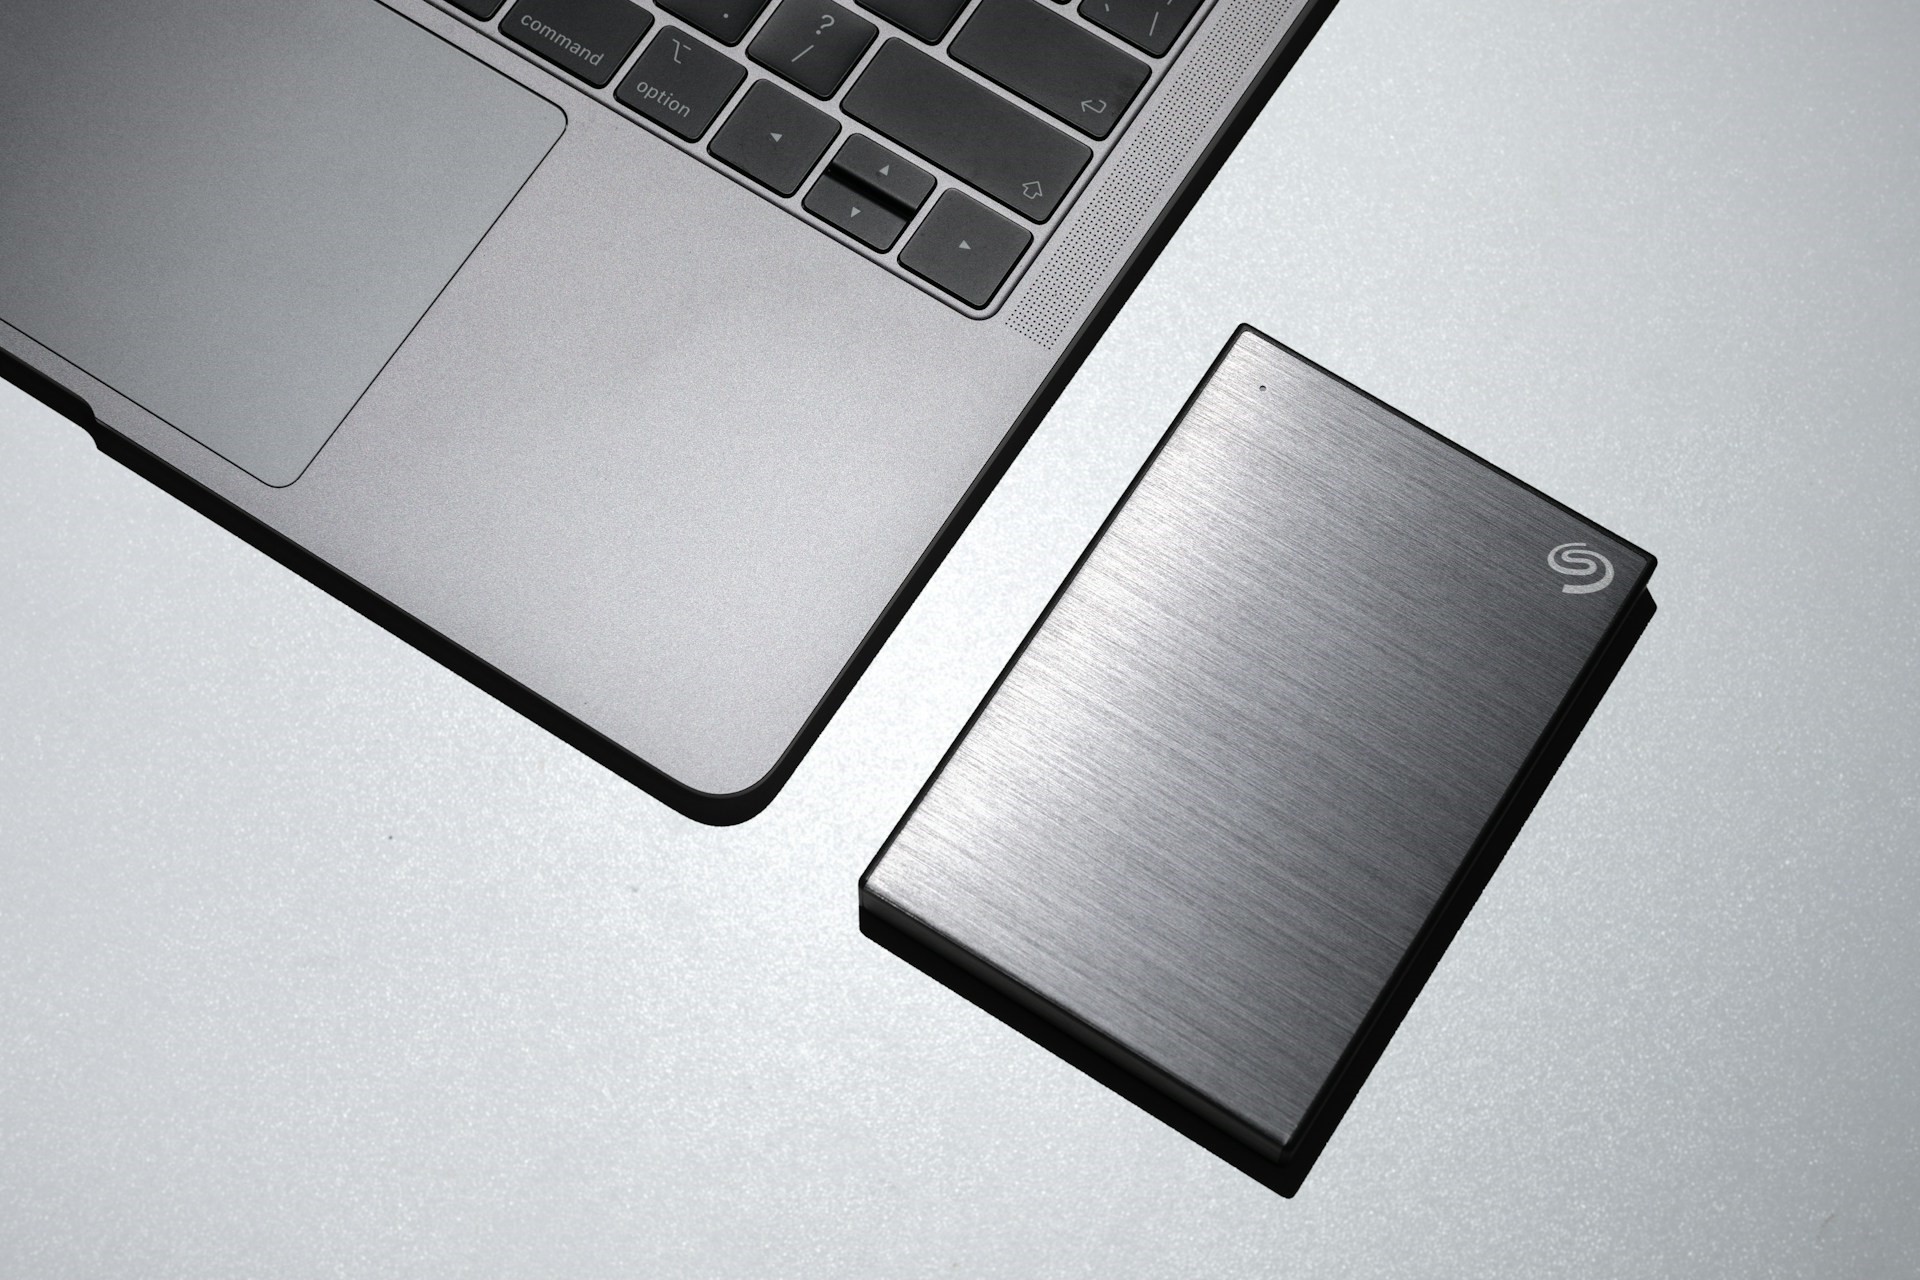 After WDC, Seagate increases SSD and HDD prices effective immediately